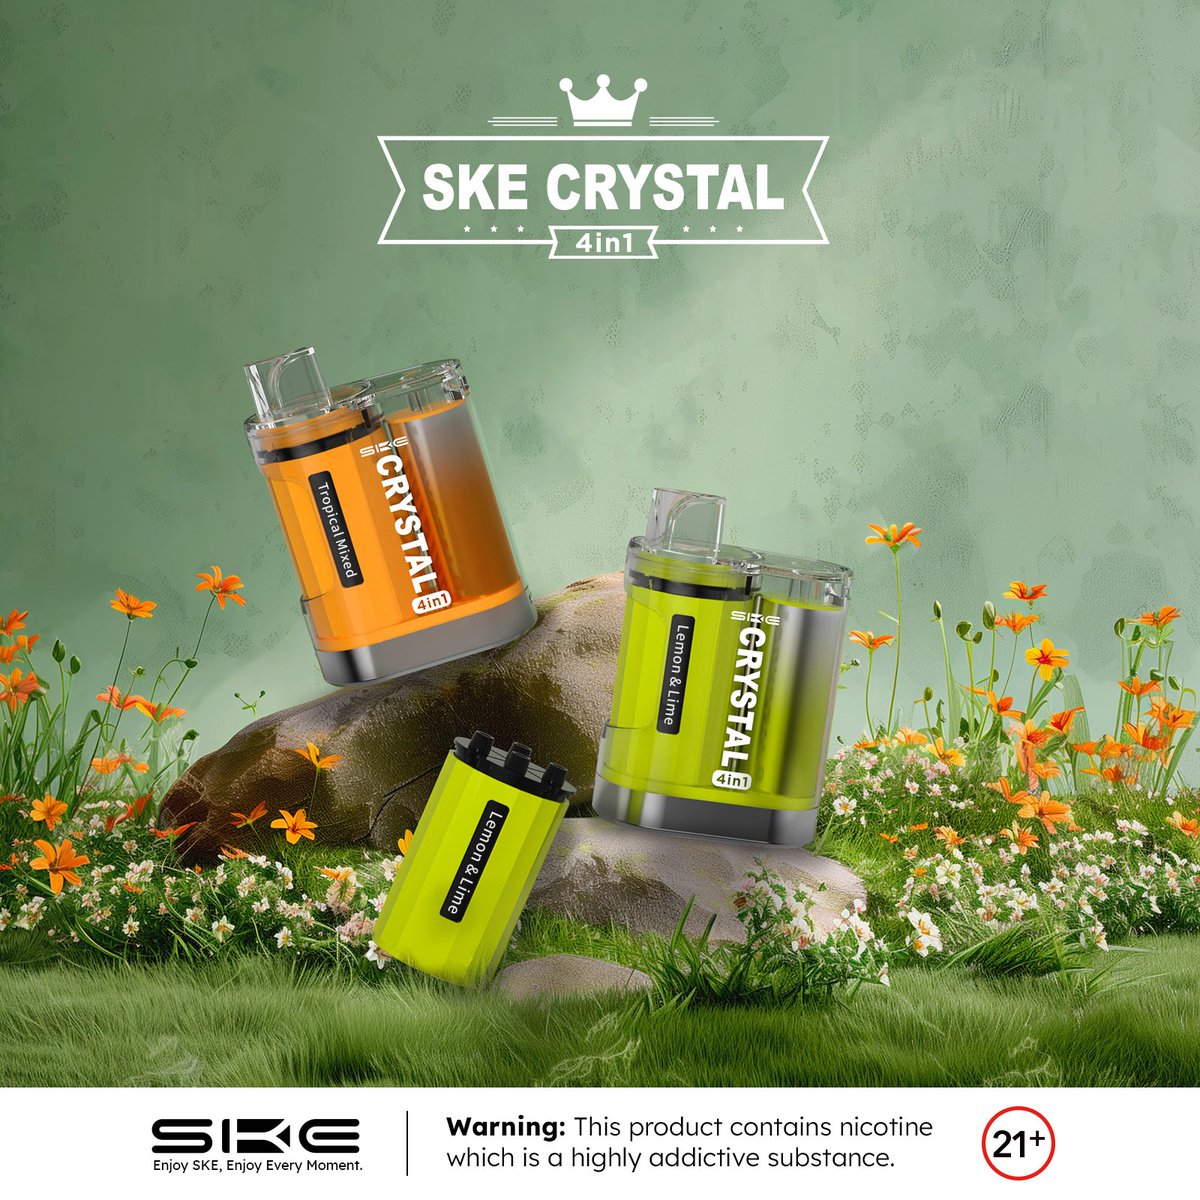 Explore the great outdoors with #skecrystal4in1! 🌿

Warning: This product contains nicotine which is a highly addictive substance. You must be 21+
#skevape #ske #vapelove #vapefam #vapefamilyuk #vapefams #vapedaily #skecrystal